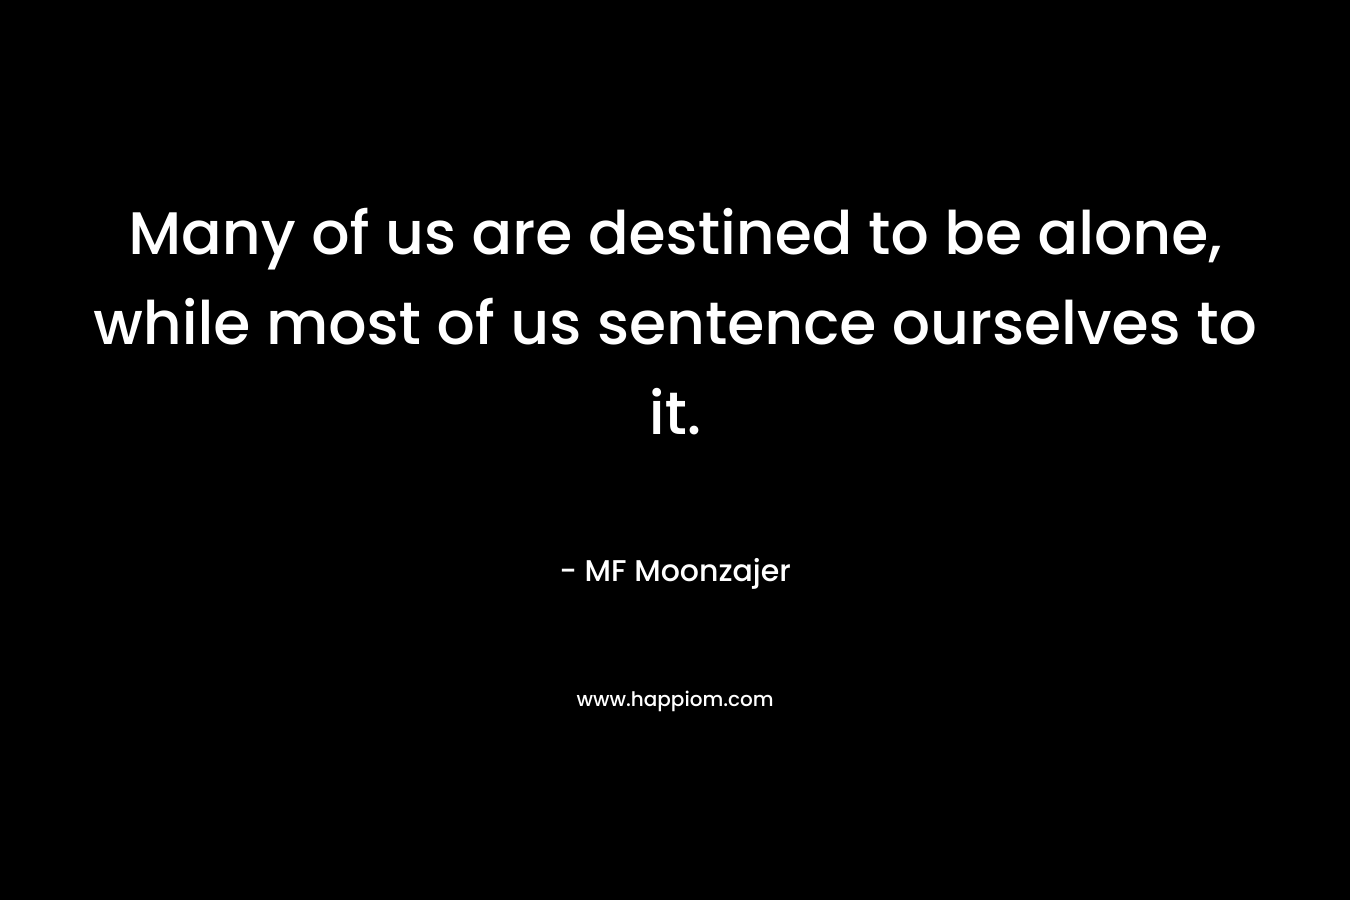 Many of us are destined to be alone, while most of us sentence ourselves to it. – MF Moonzajer